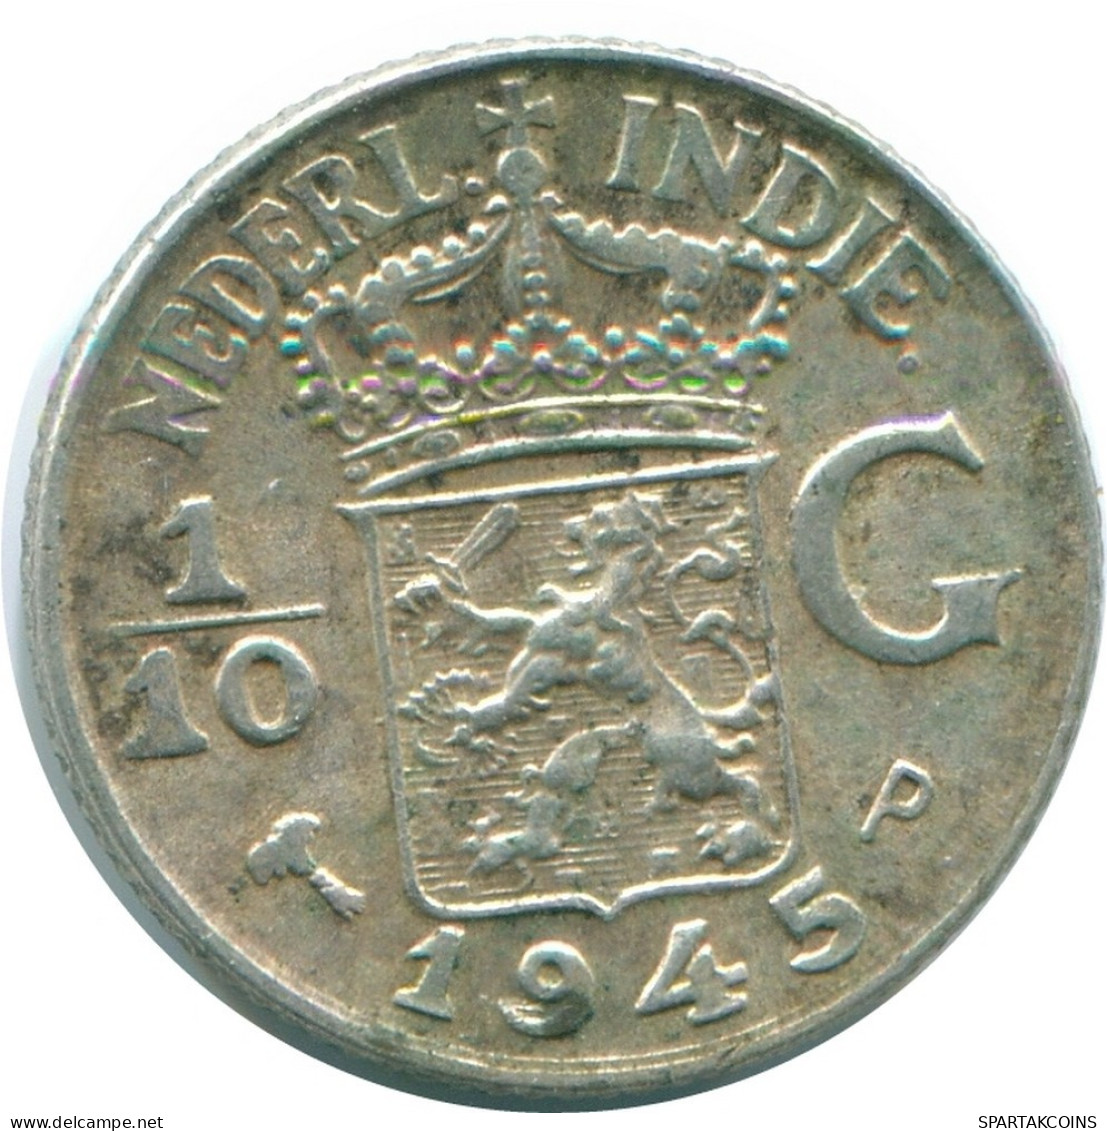 1/10 GULDEN 1945 P NETHERLANDS EAST INDIES SILVER Colonial Coin #NL14132.3.U.A - Indes Neerlandesas